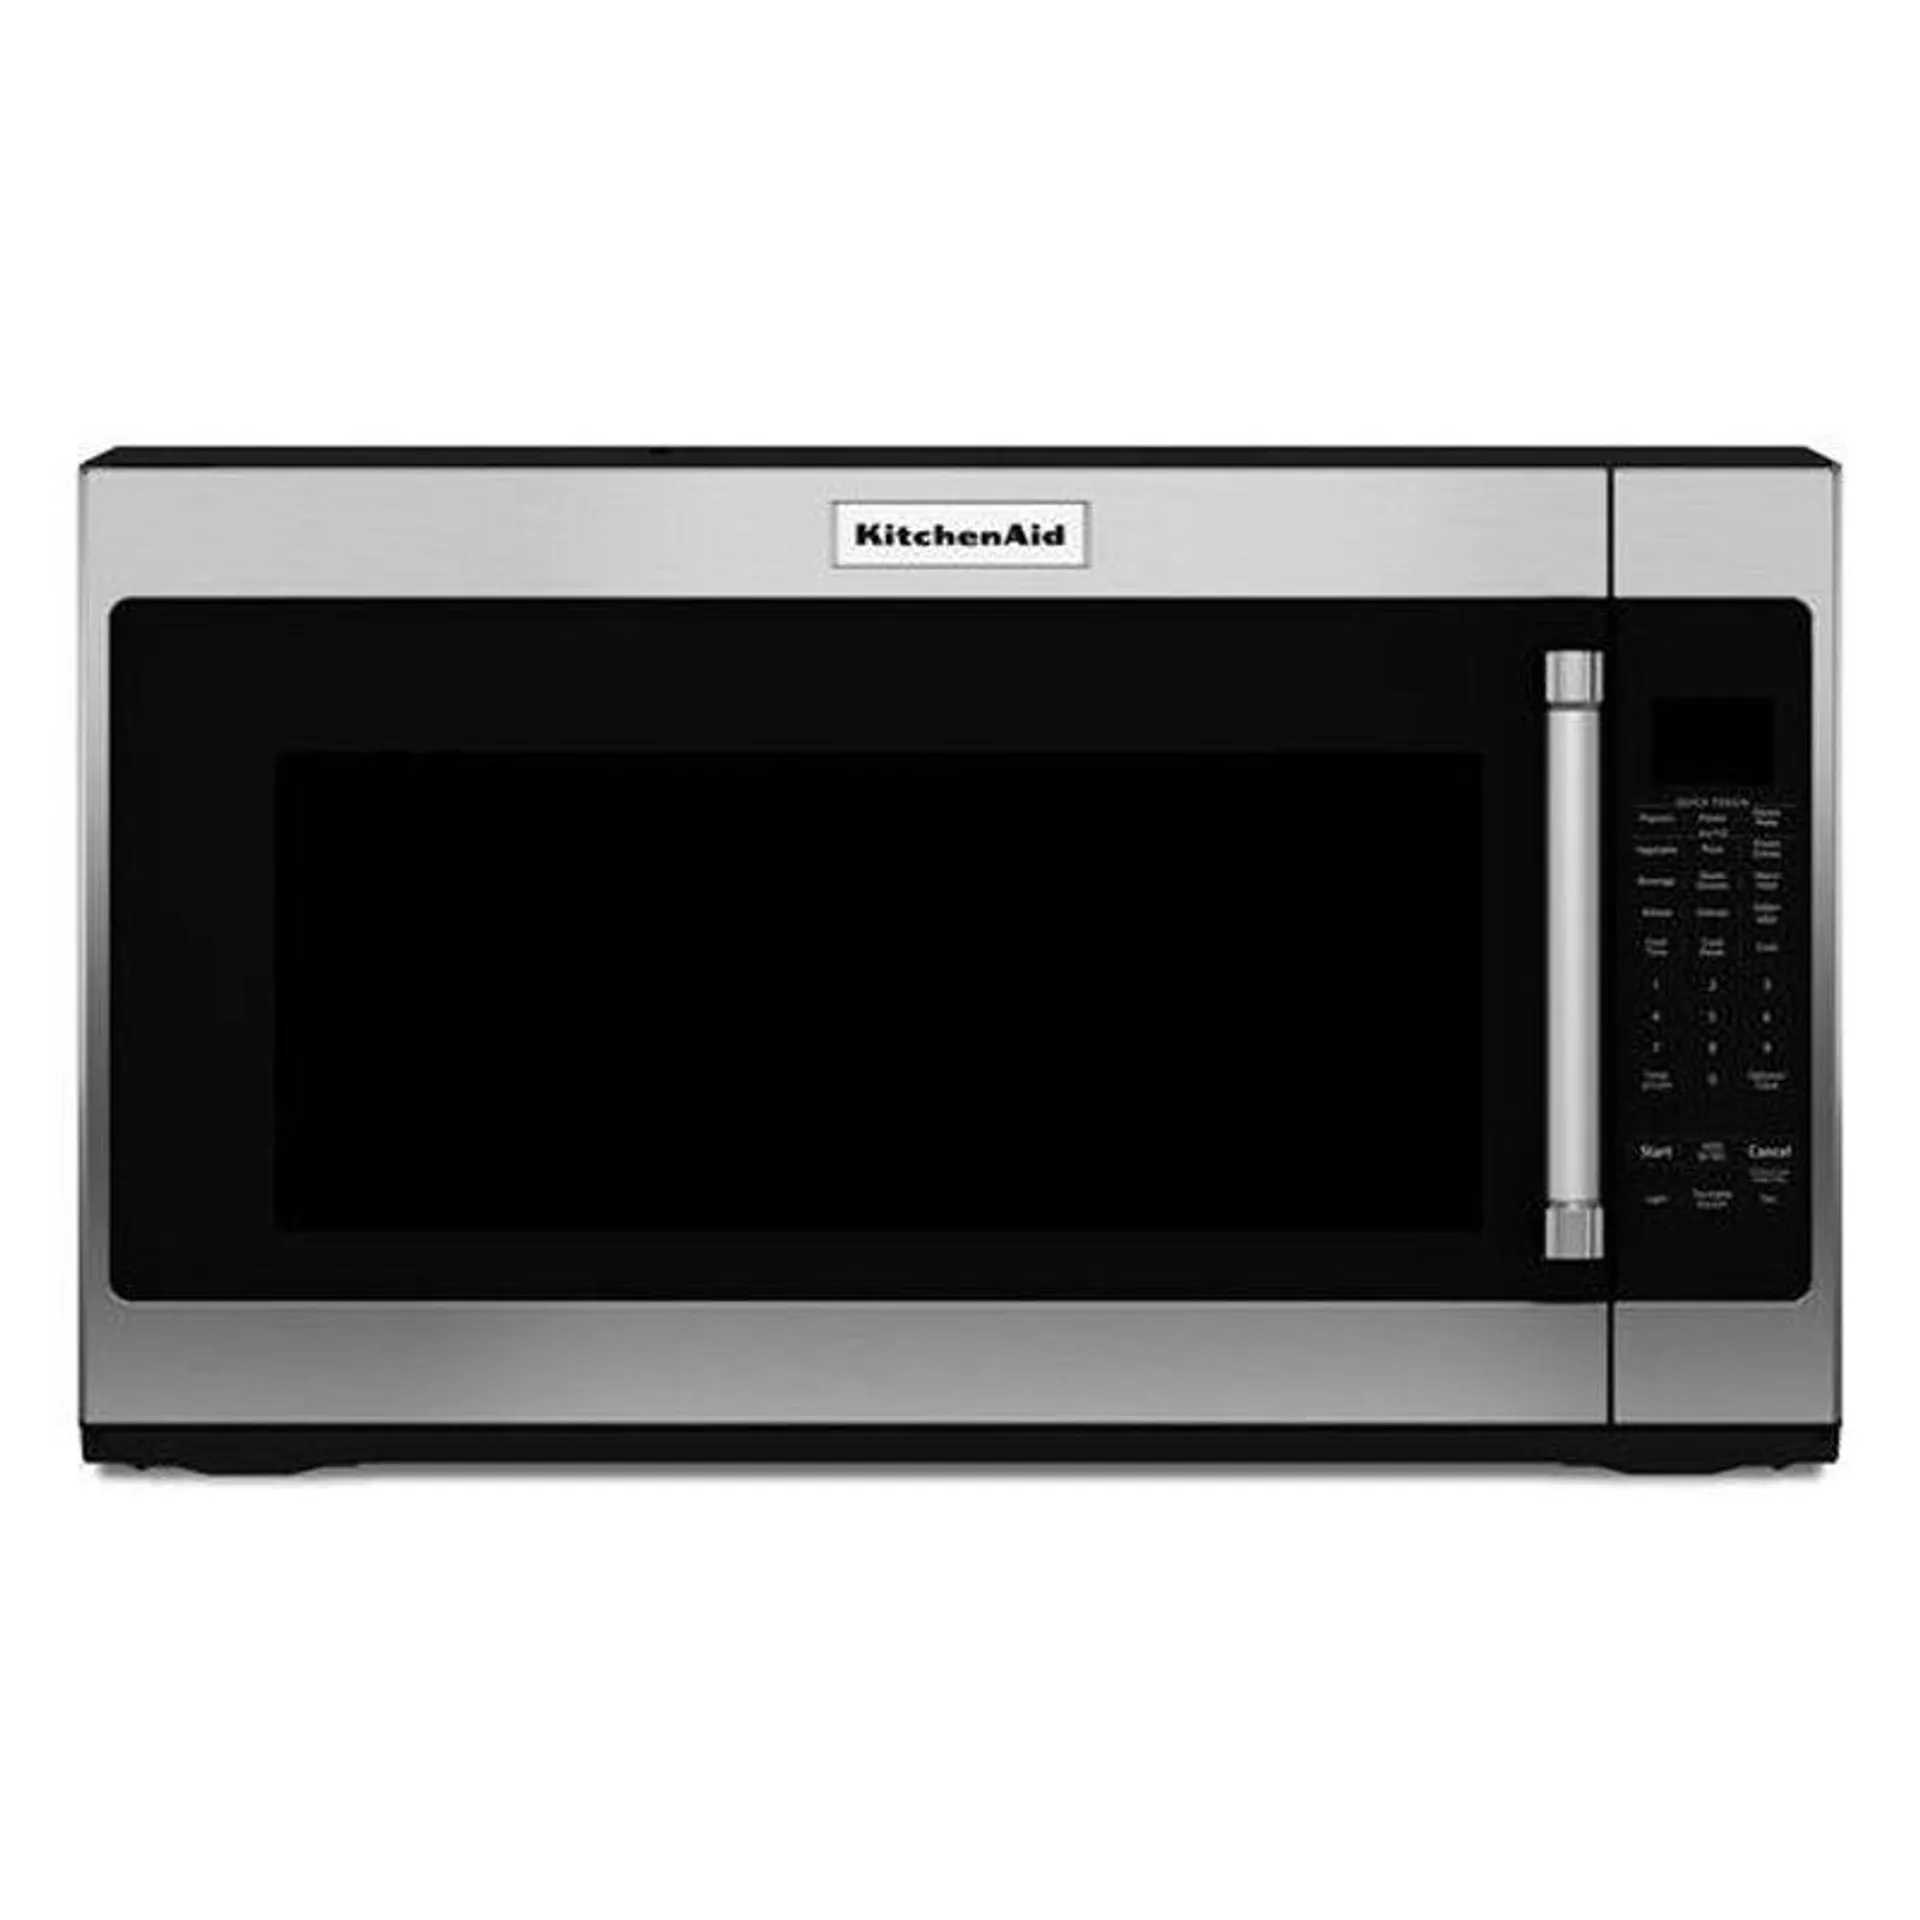 KitchenAid 30" 2 Cu. Ft. Over-the-Range Microwave with 10 Power Levels, 400 CFM & Sensor Cooking Controls - Stainless Steel